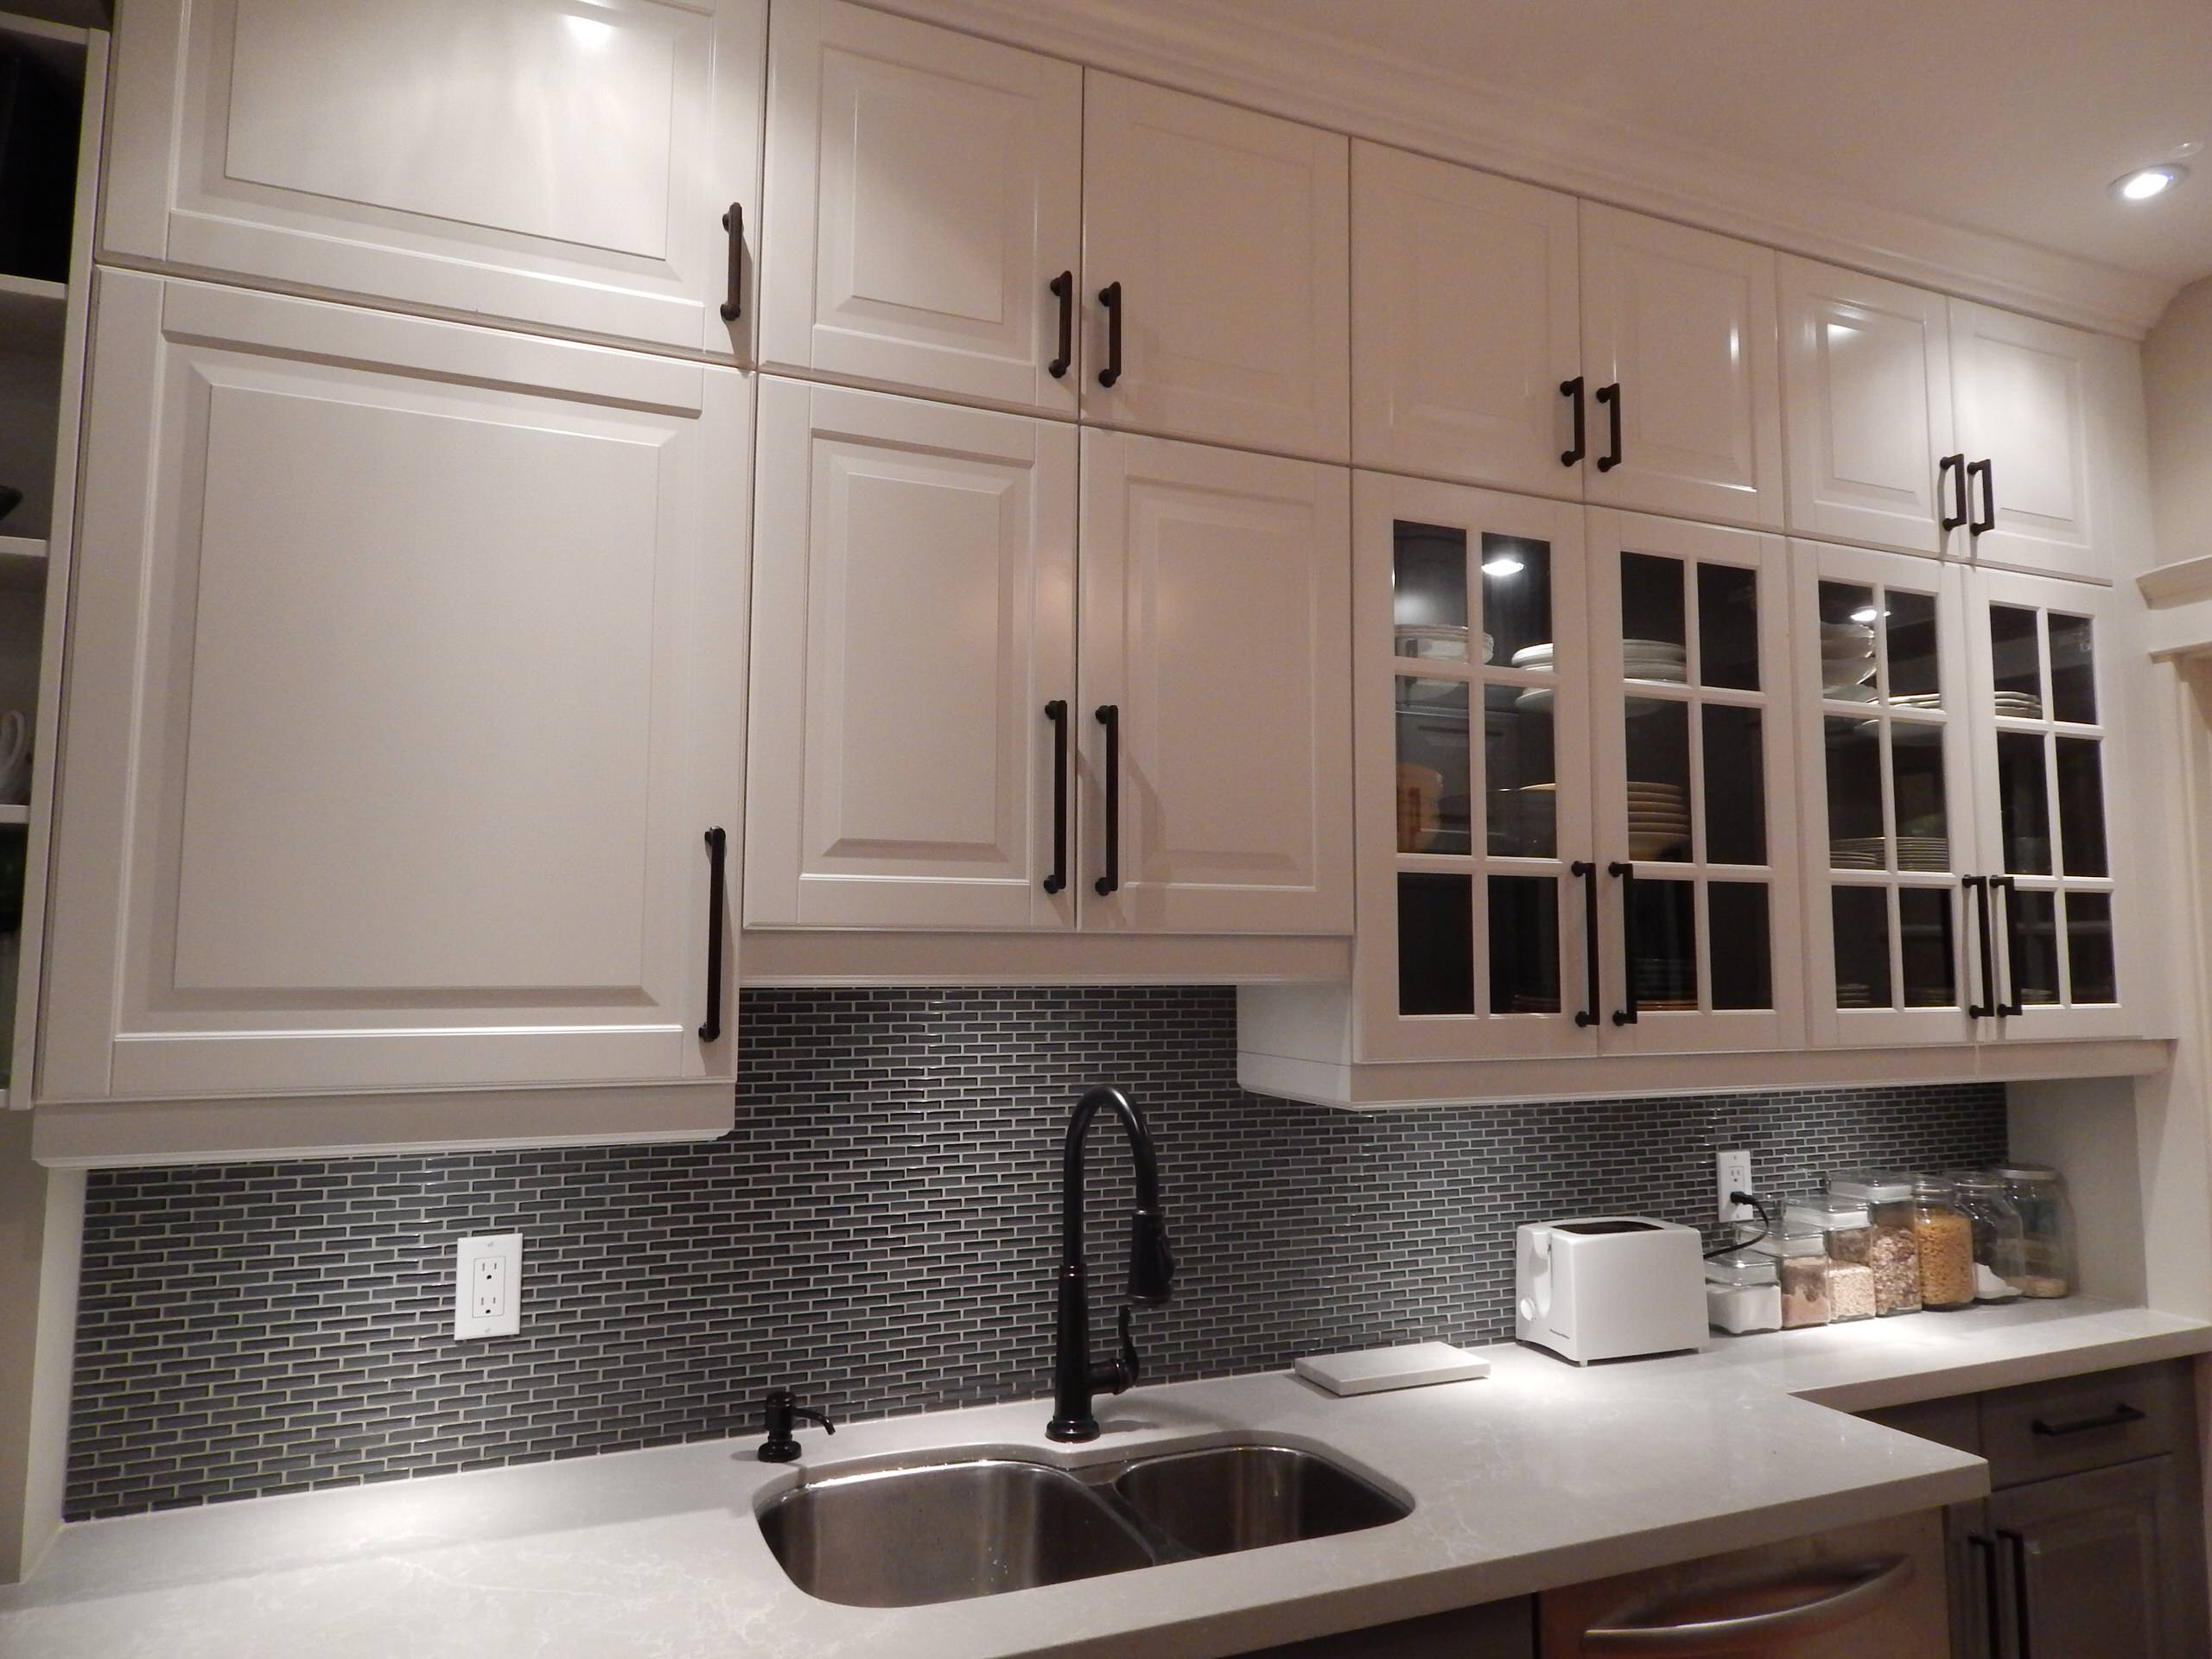 Stack Wall Cabinets Houzz, Can You Stack Kitchen Wall Cabinets